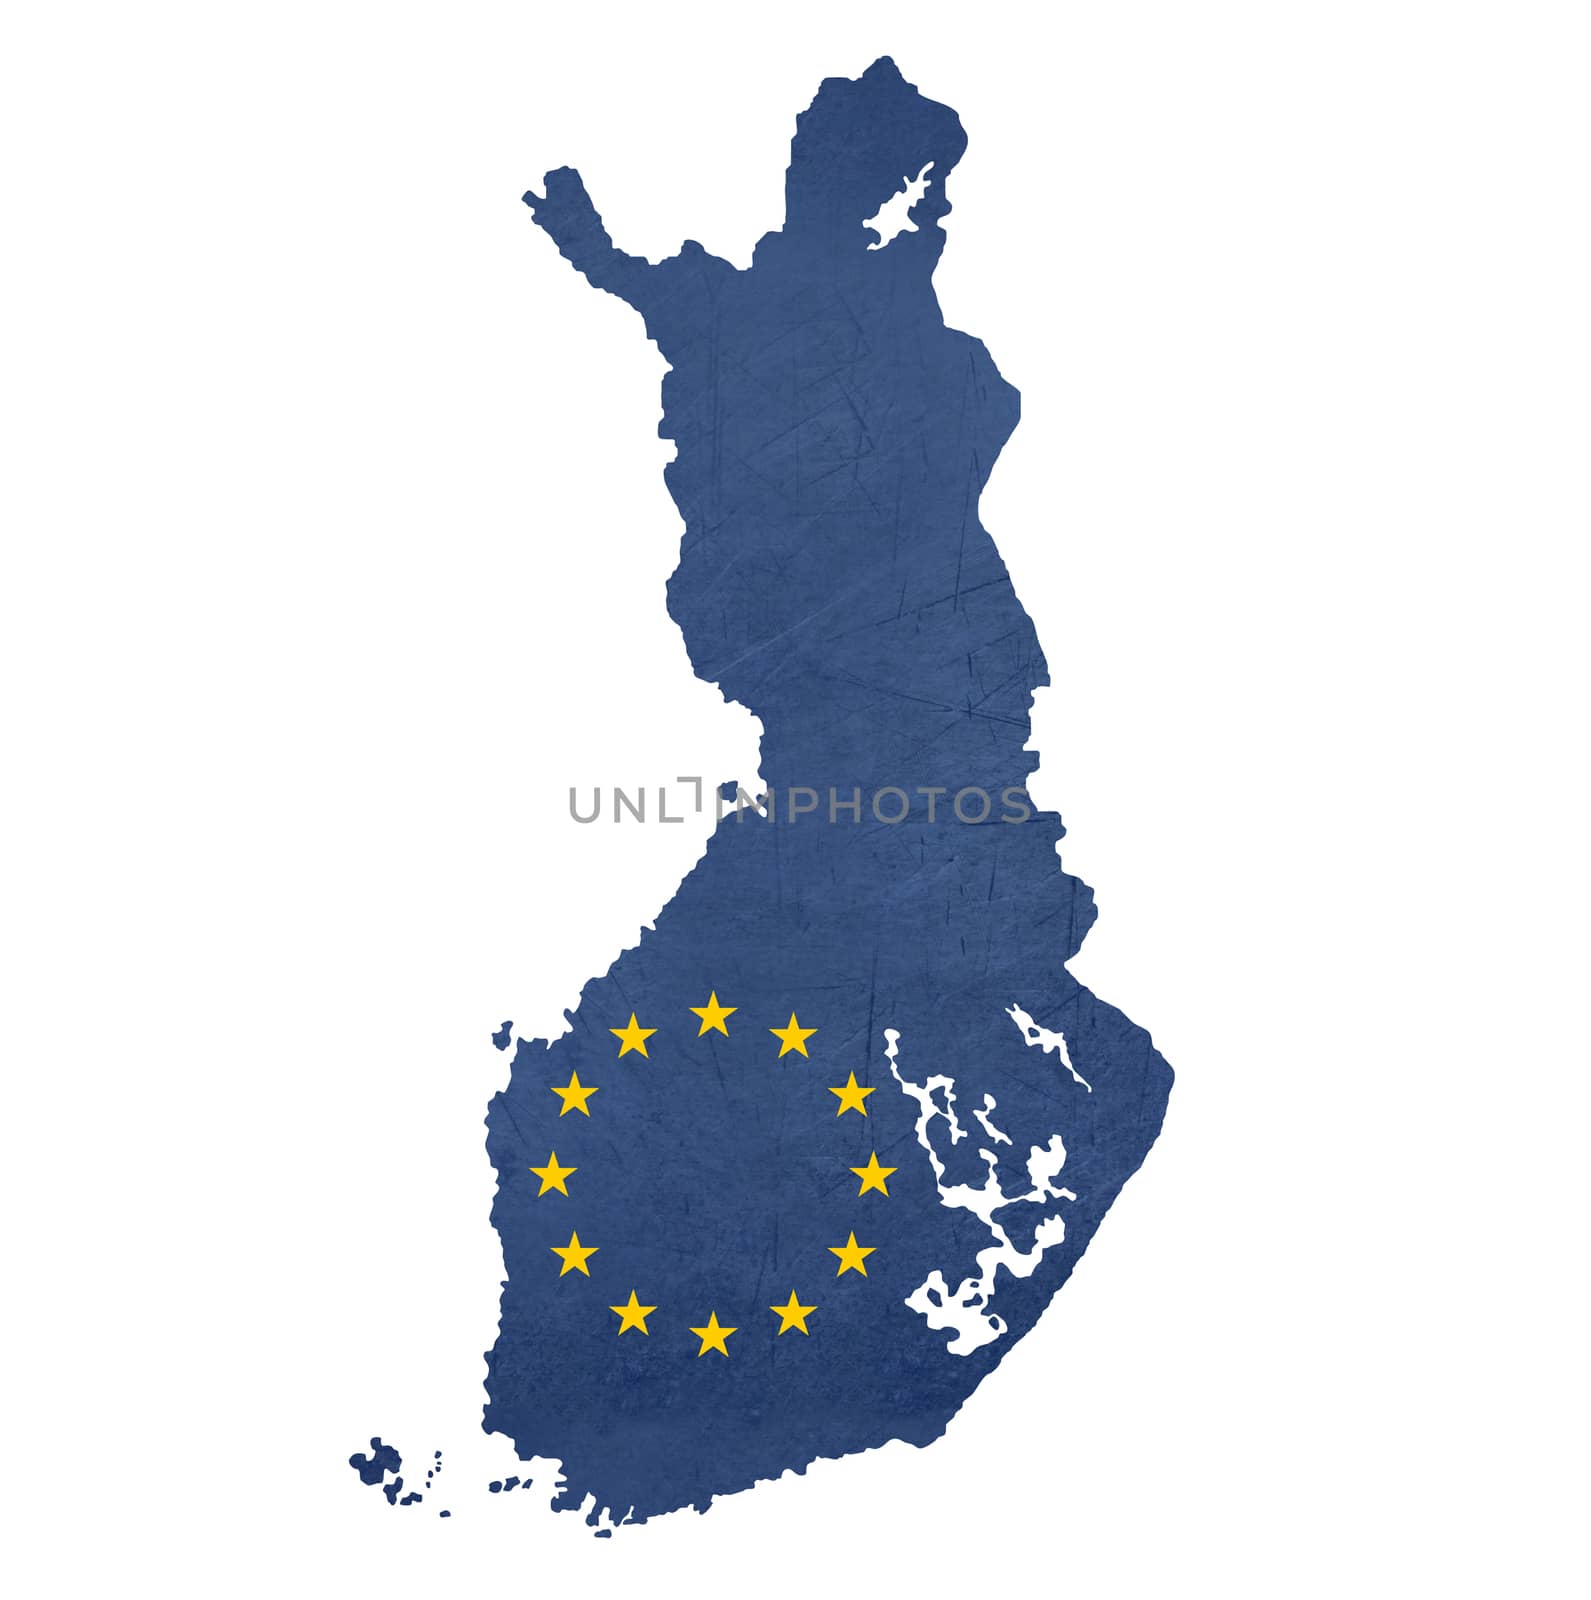 European flag map of Finland isolated on white background.